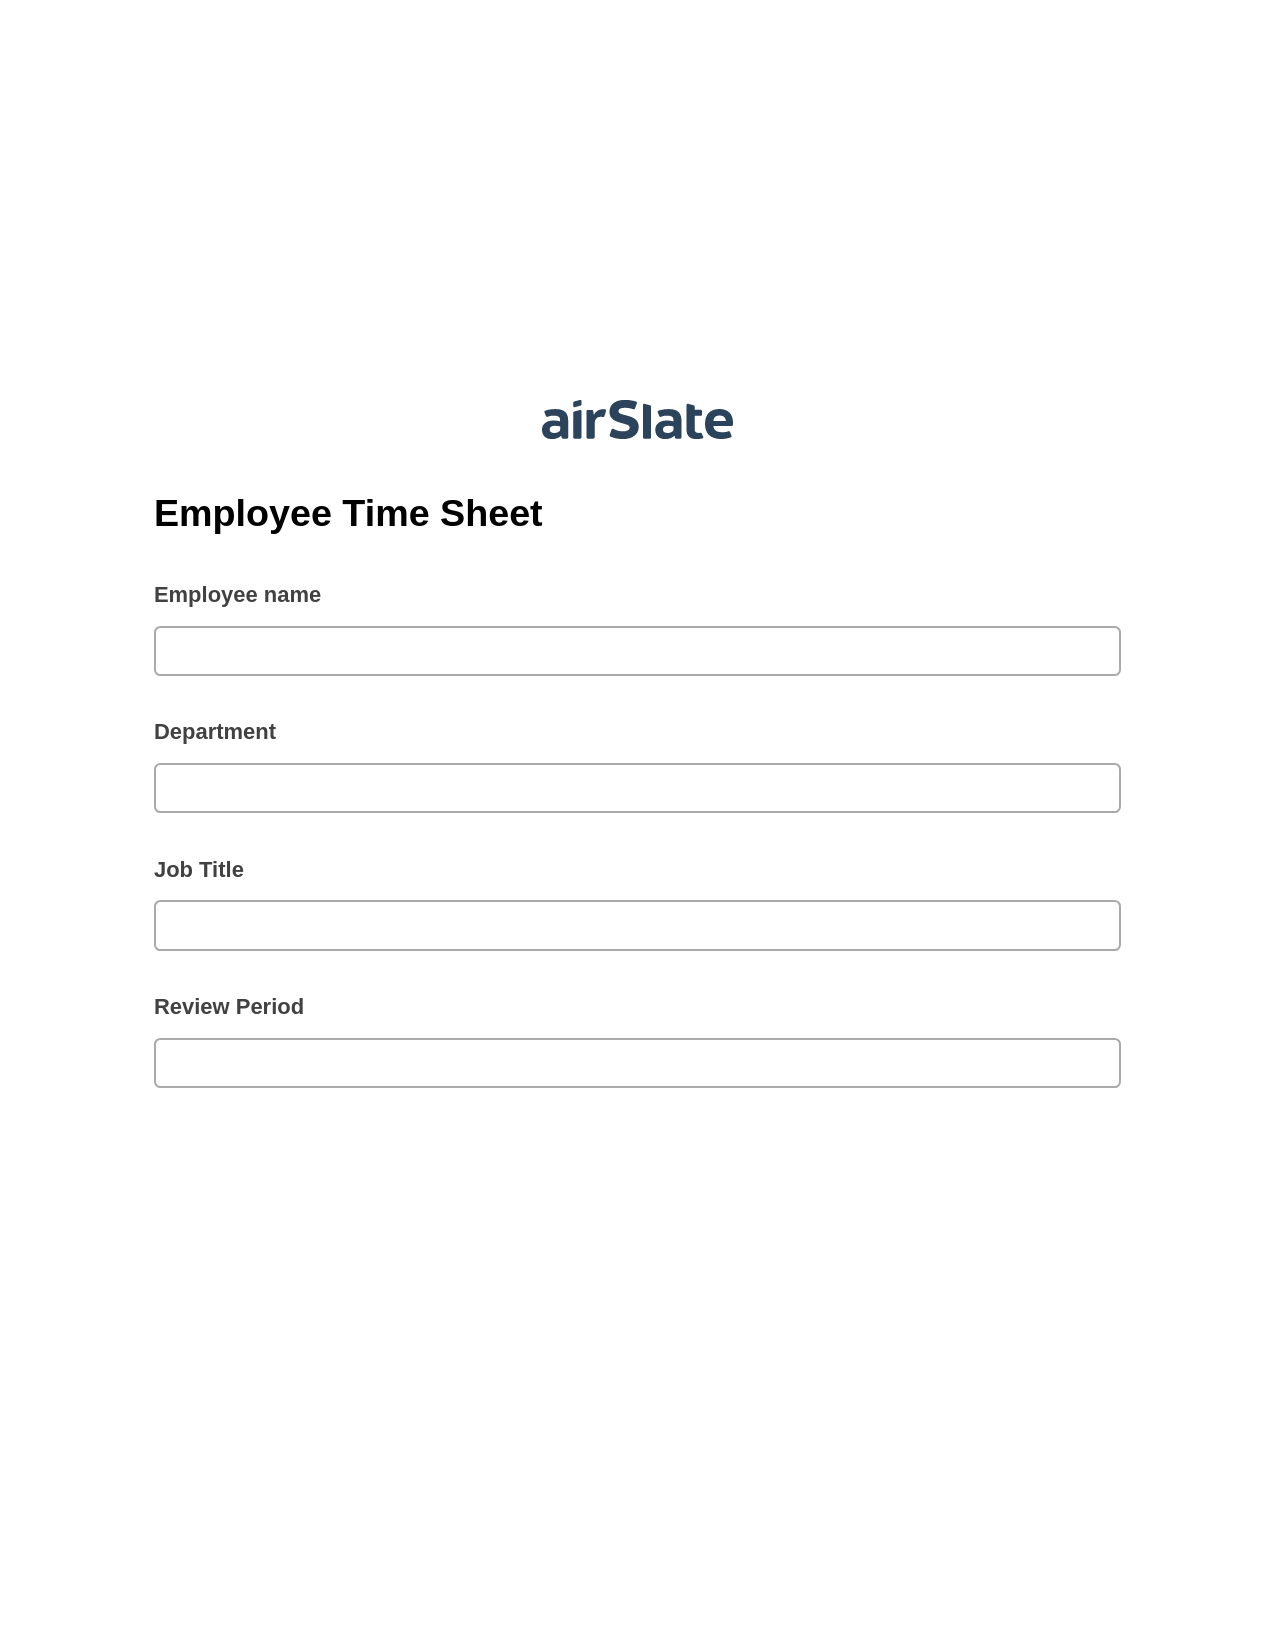 Multirole Employee Time Sheet Pre-fill Dropdowns from Excel Bot, Create slate addon, Archive to Google Drive Bot